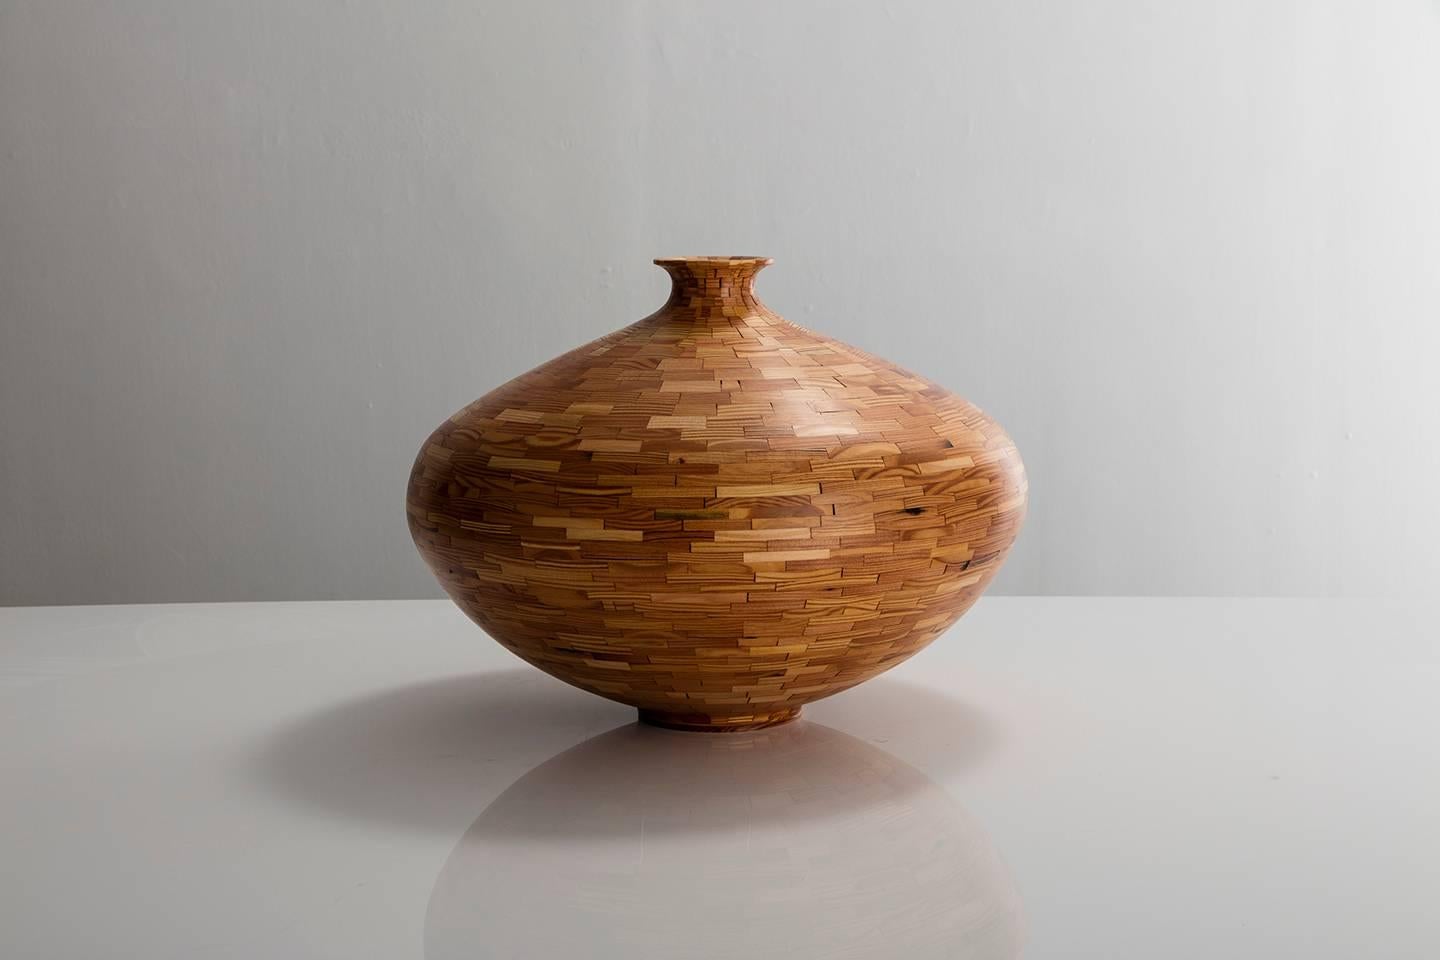 Part of Richard Haining's Stacked Collection, this saucer shaped vase was made using reclaimed Heart Pine, salvaged from a gutted Brooklyn Brownstone's building joist. The wood's natural coloring shows off tones ranging from light yellows and blonde